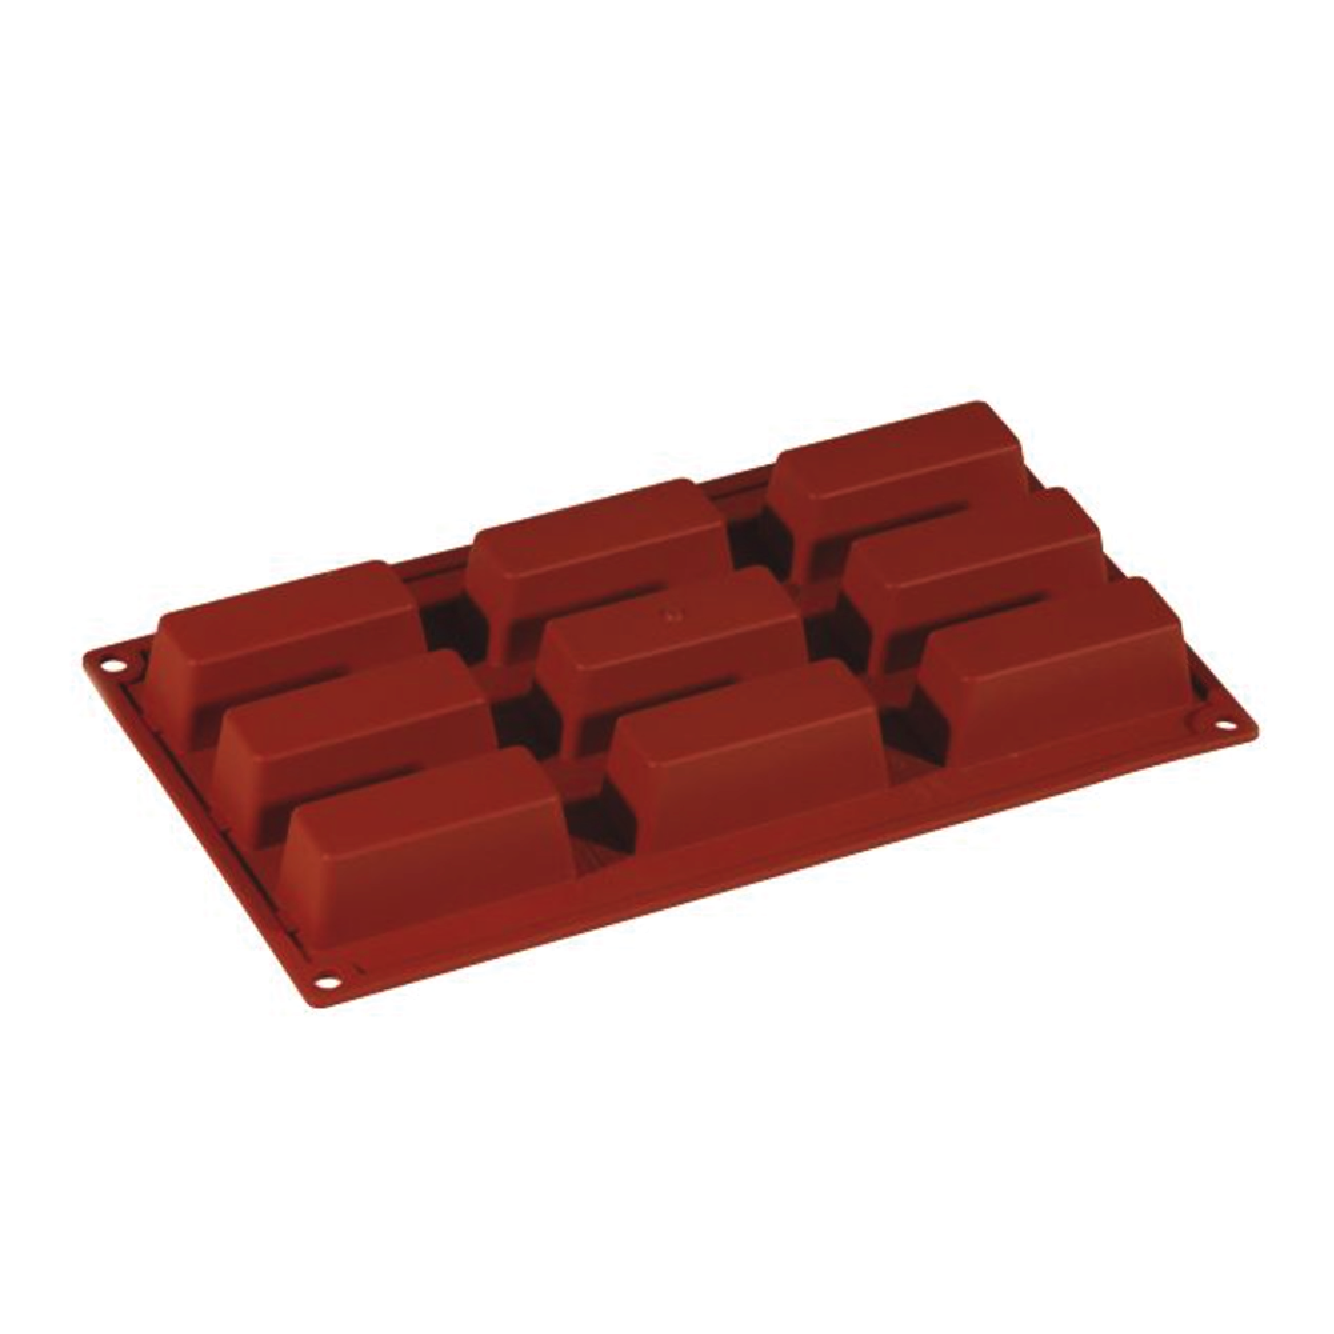 Pavoni Formaflex silicone mould "Cake" FR028